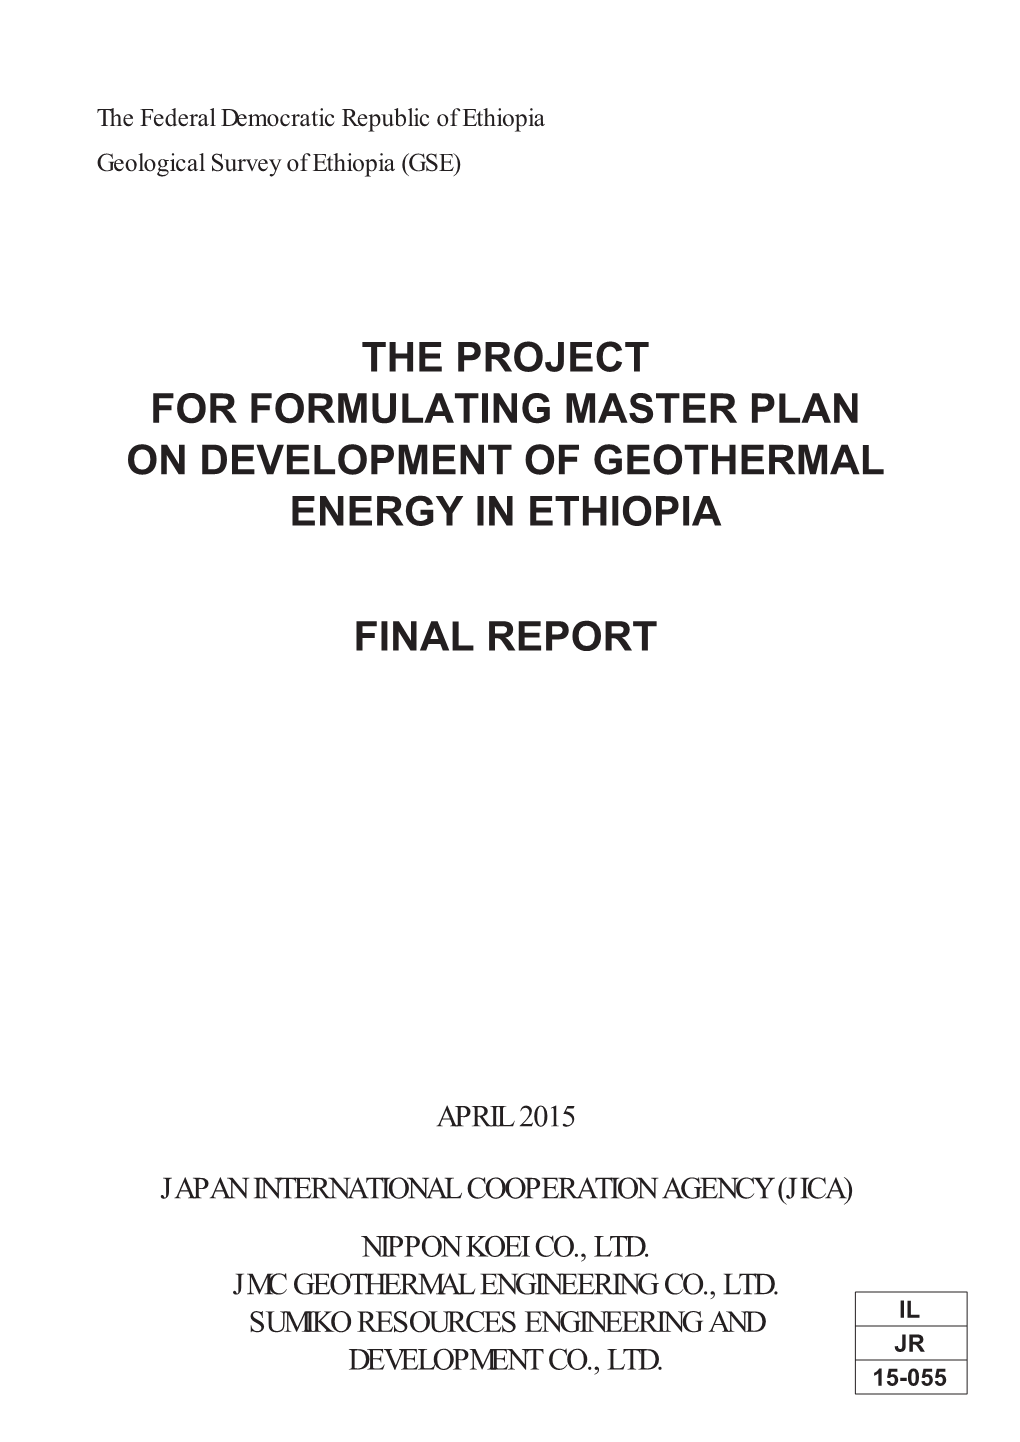 The Project for Formulating Master Plan on Development of Geothermal Energy in Ethiopia